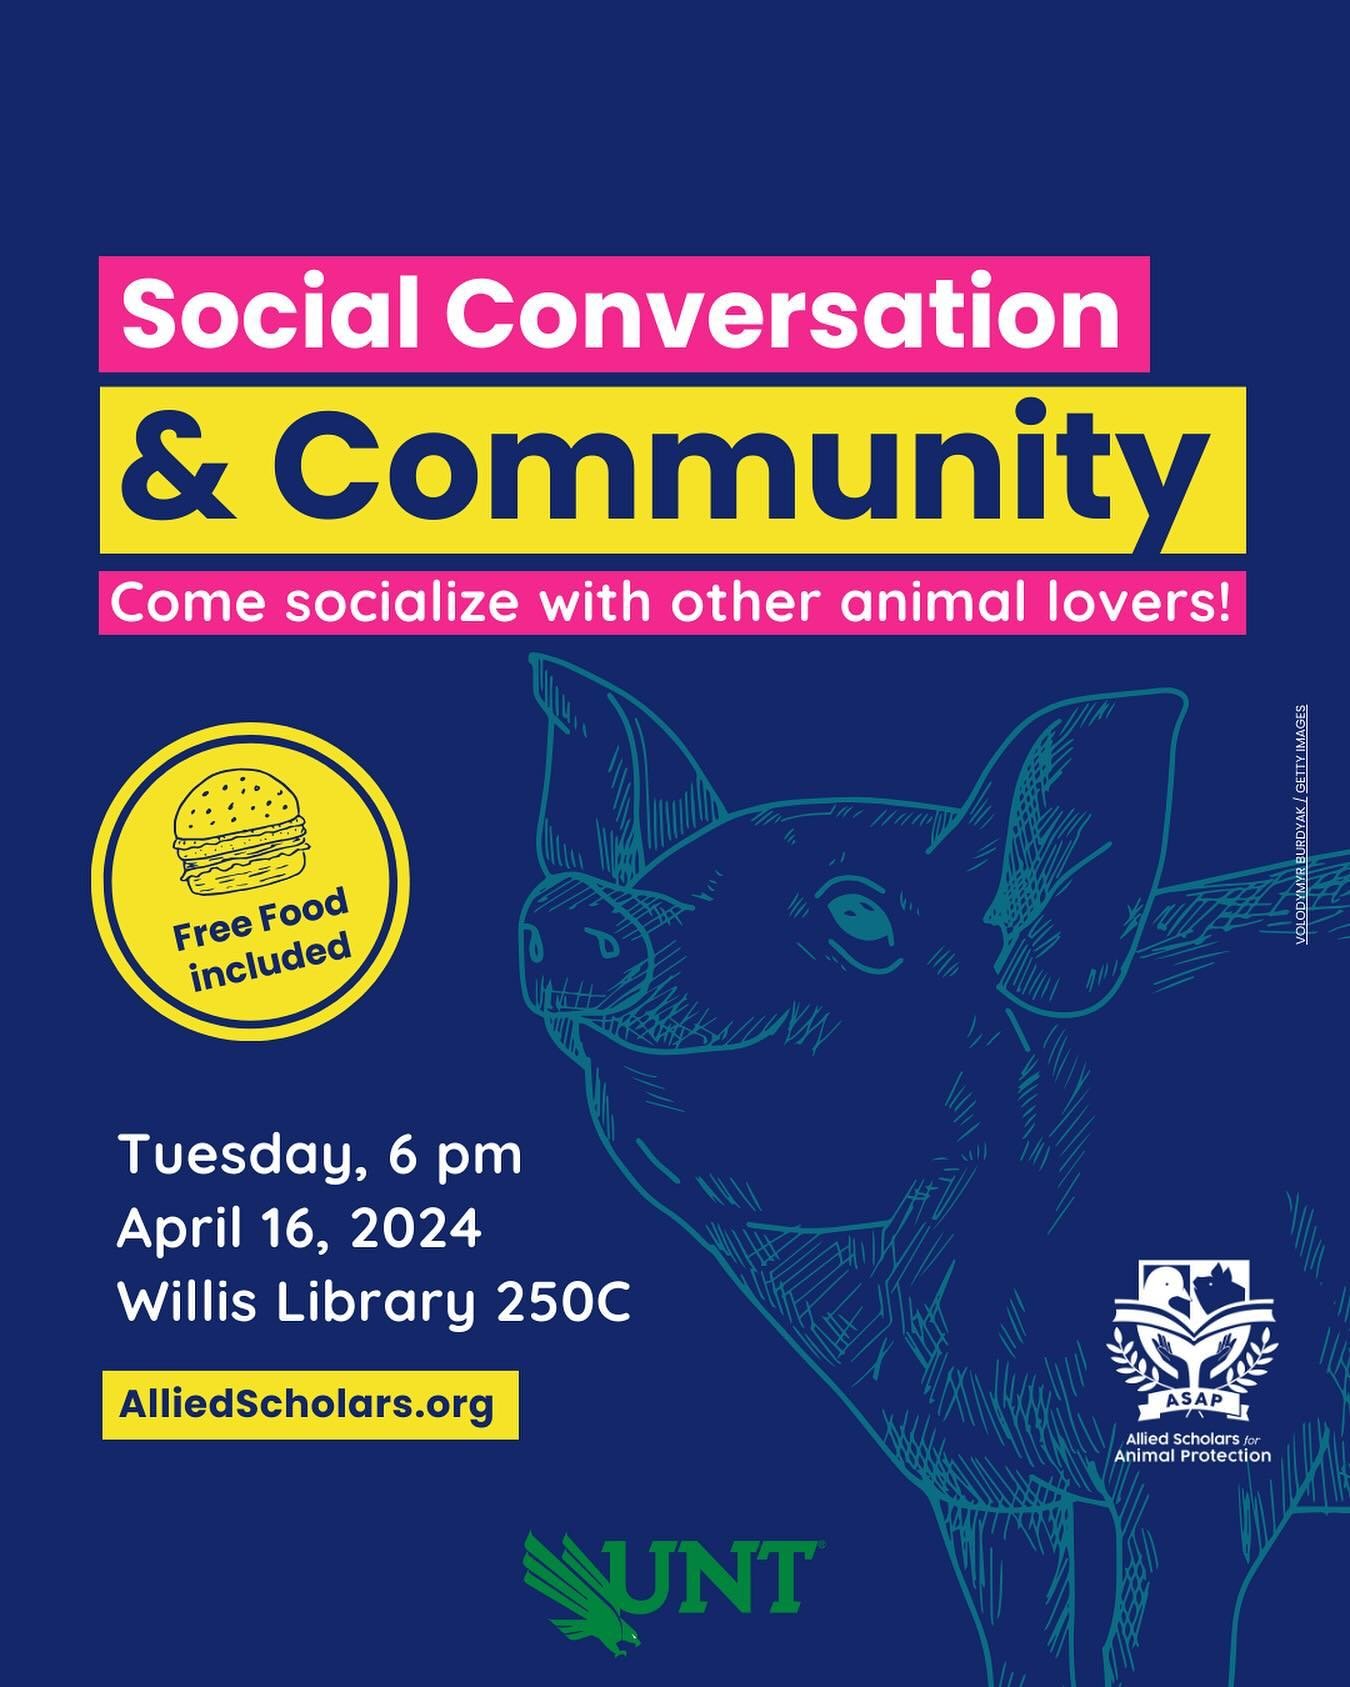 Reminder: Come join our vegan social today at 6 pm in room 250C at Willis Library!